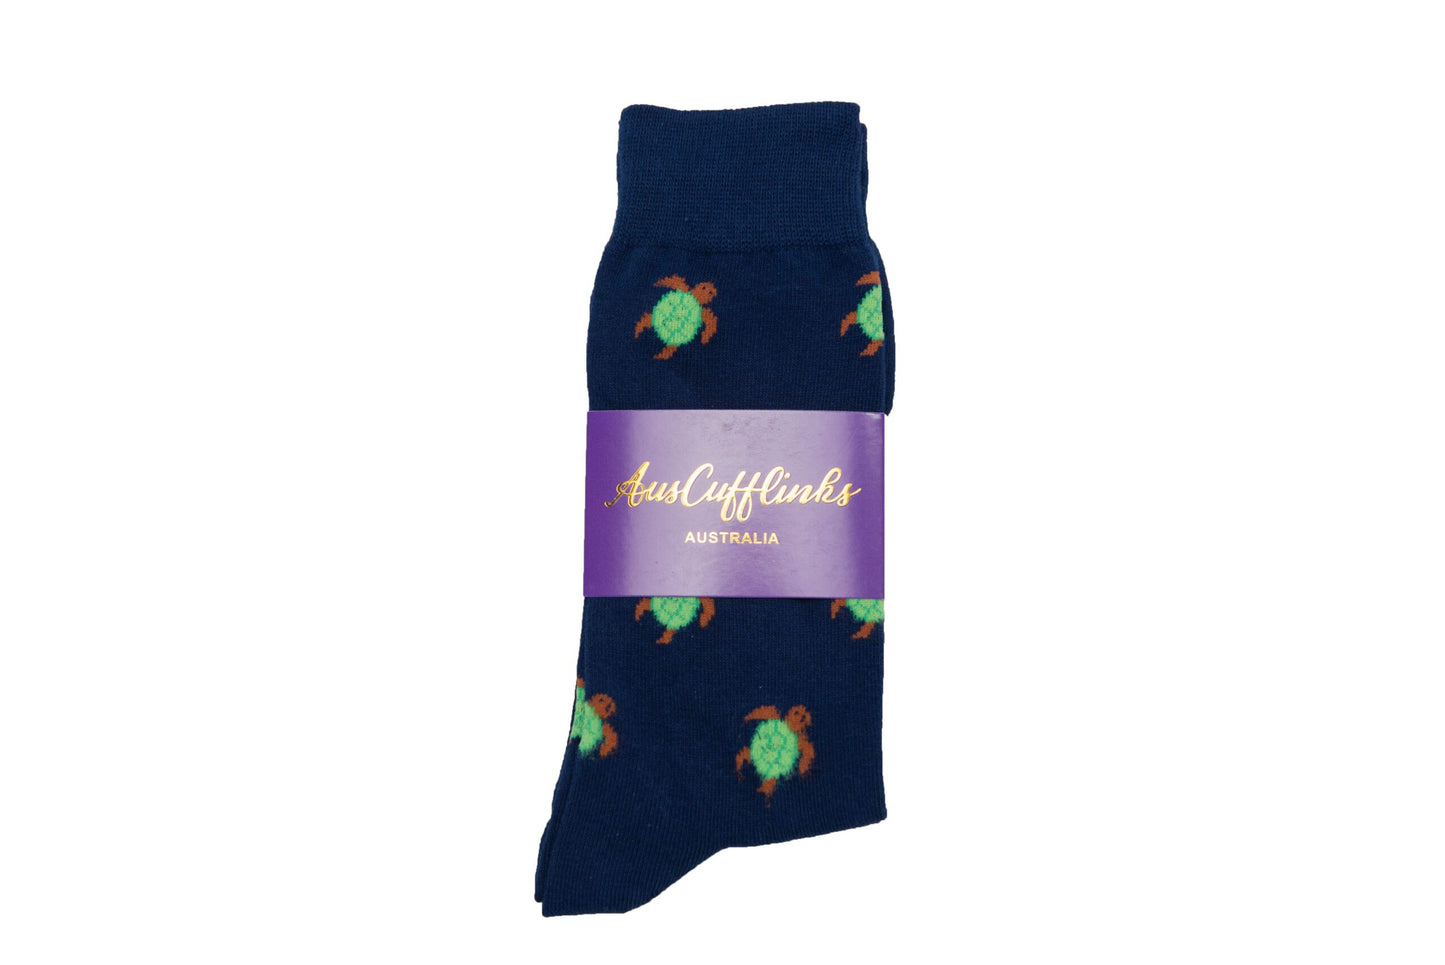 A pair of Green Turtle Socks.